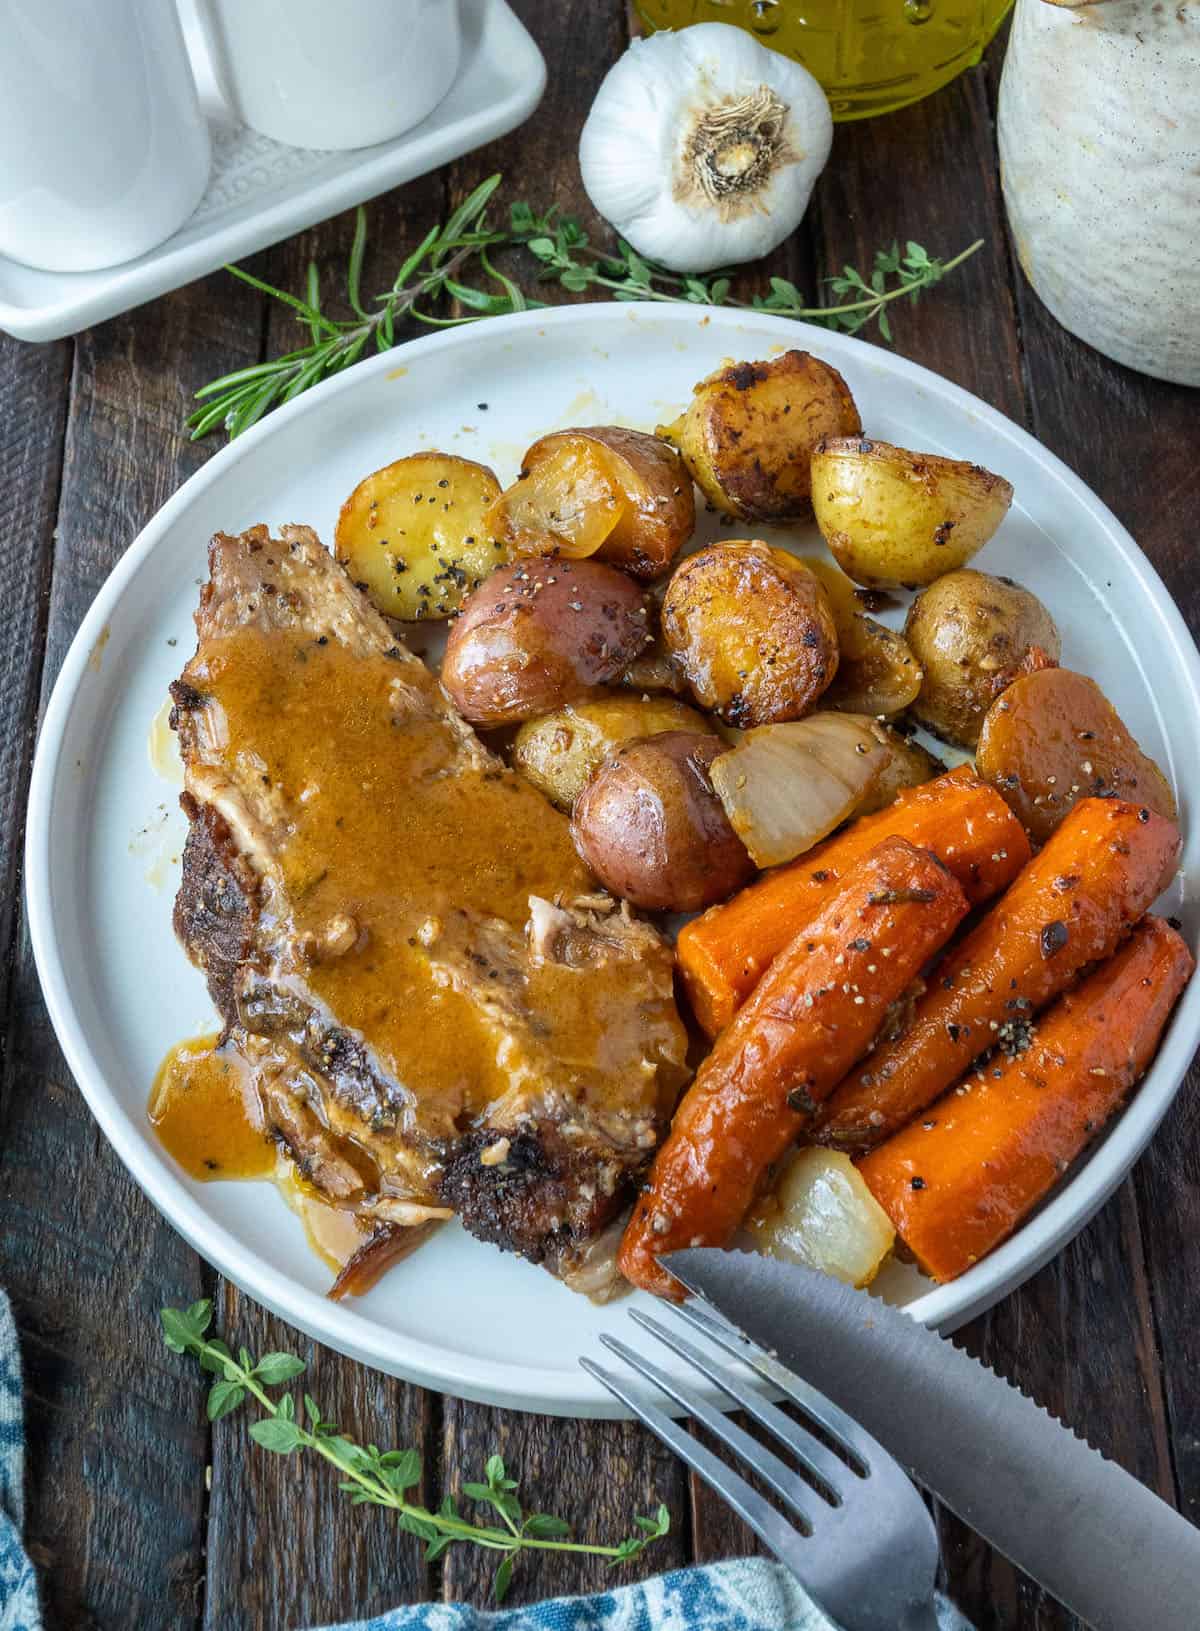 A slice of roasted pork on a plate with baby potatoes and roasted carrots.